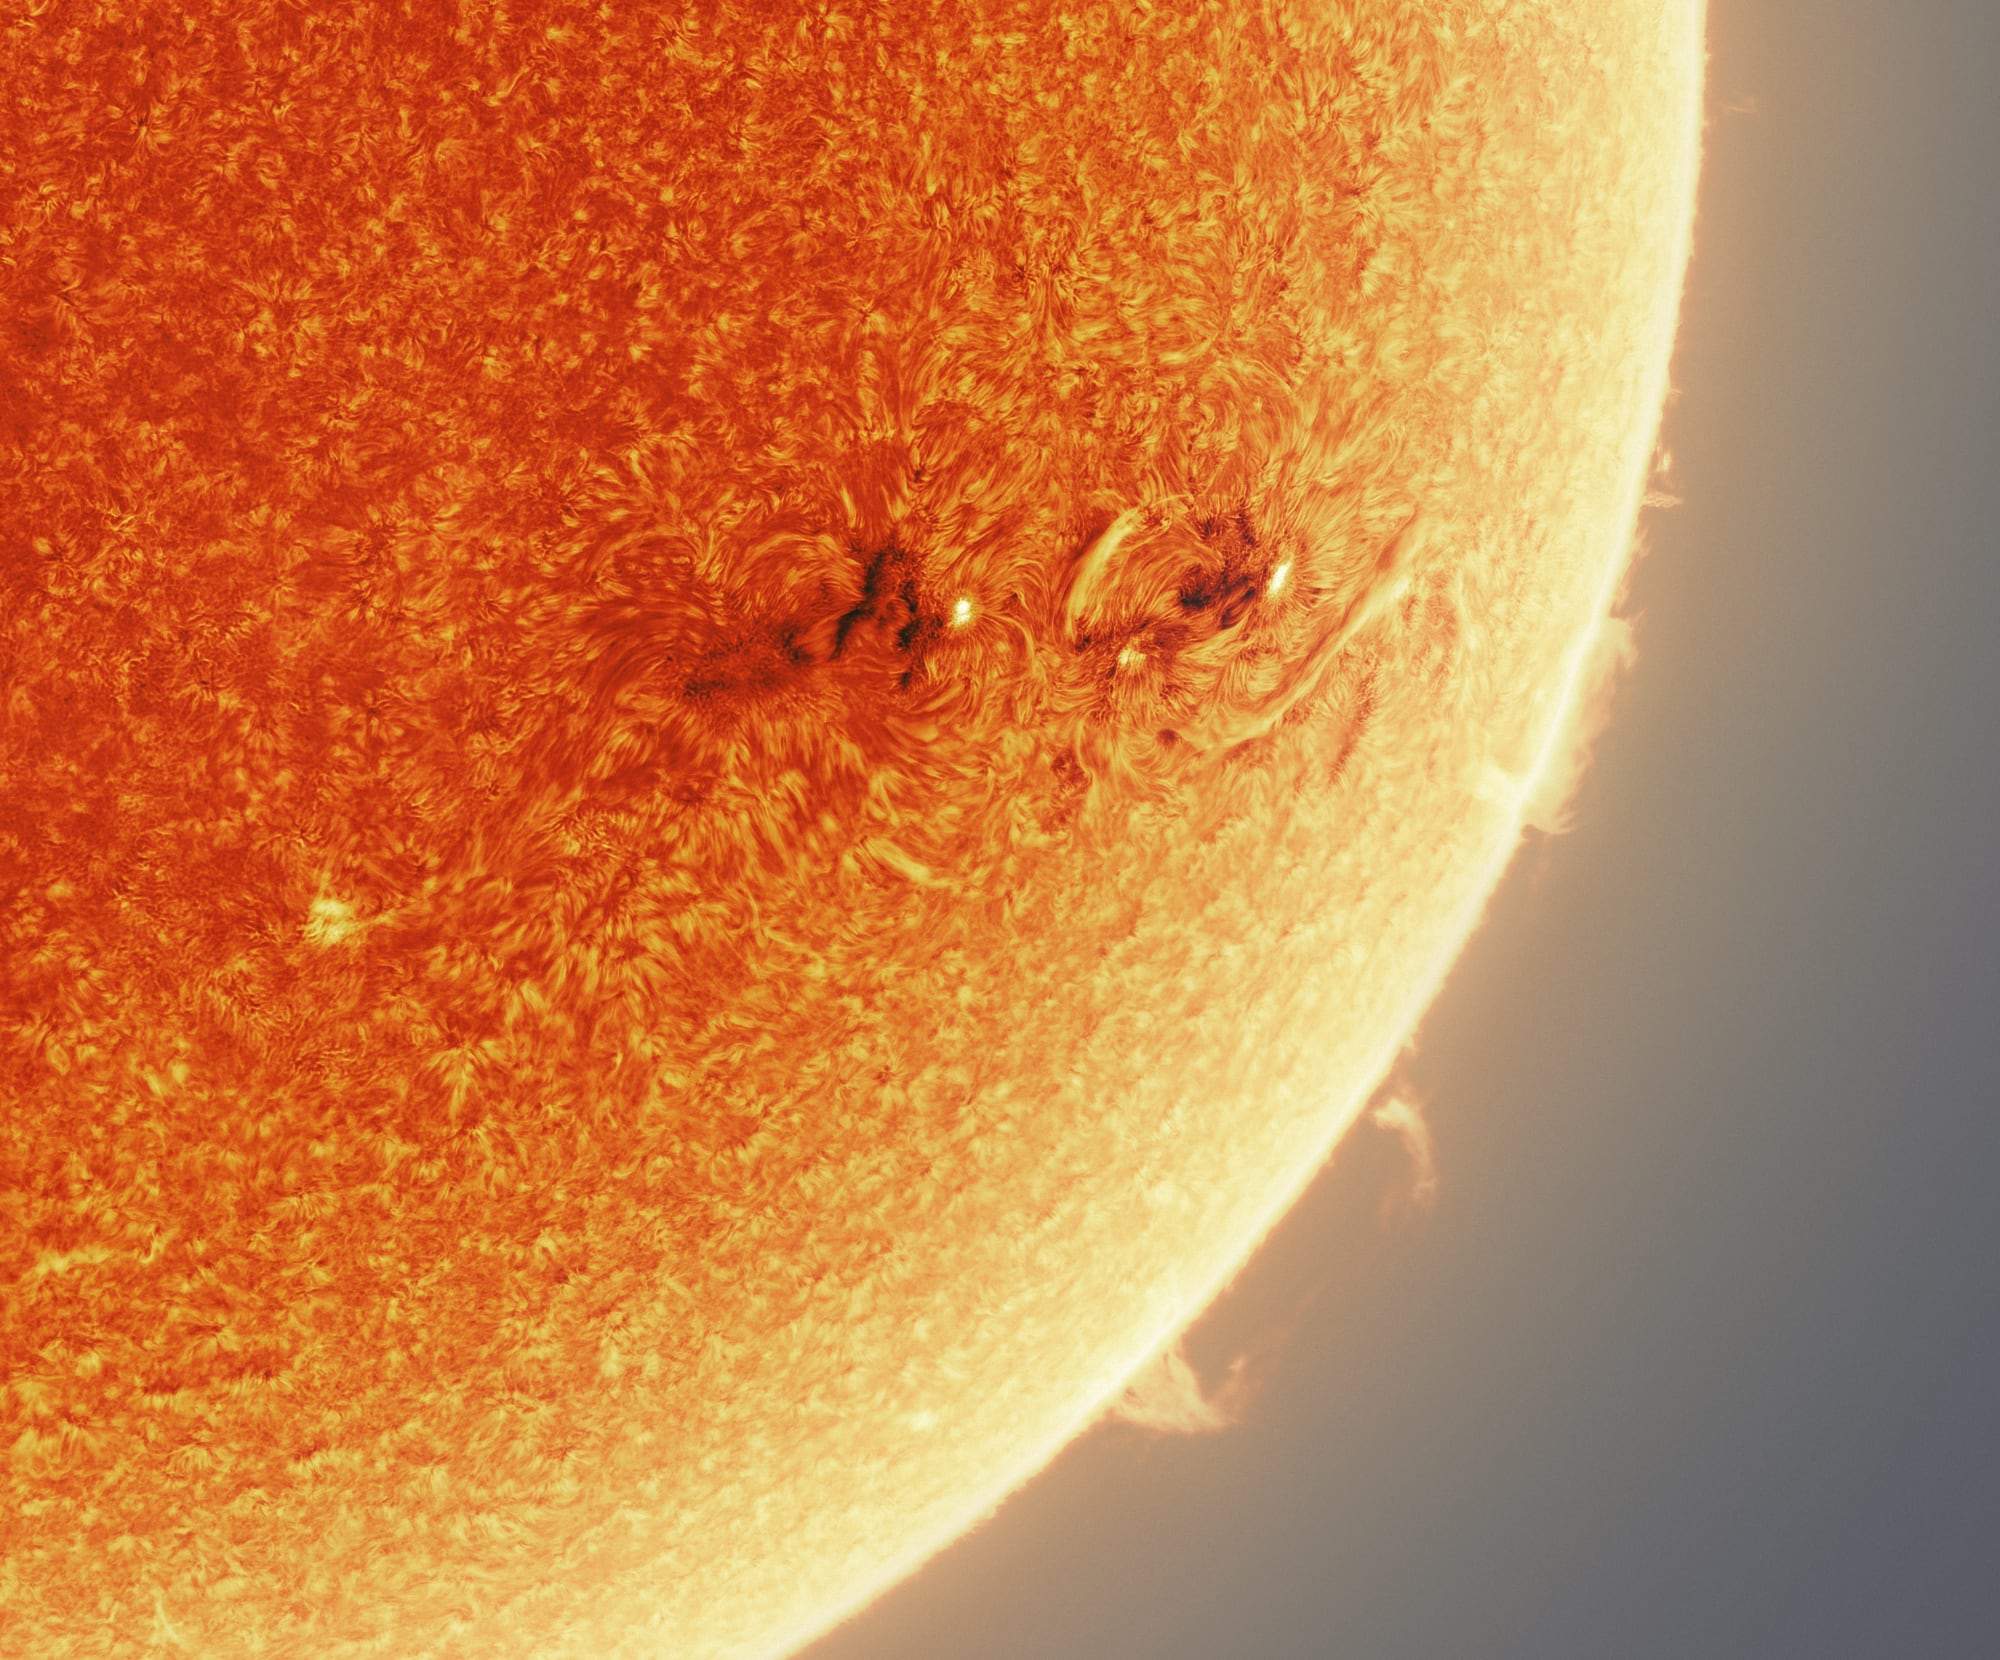 World’s Highest Resolution Image of the Sun Using 150,000 Photos